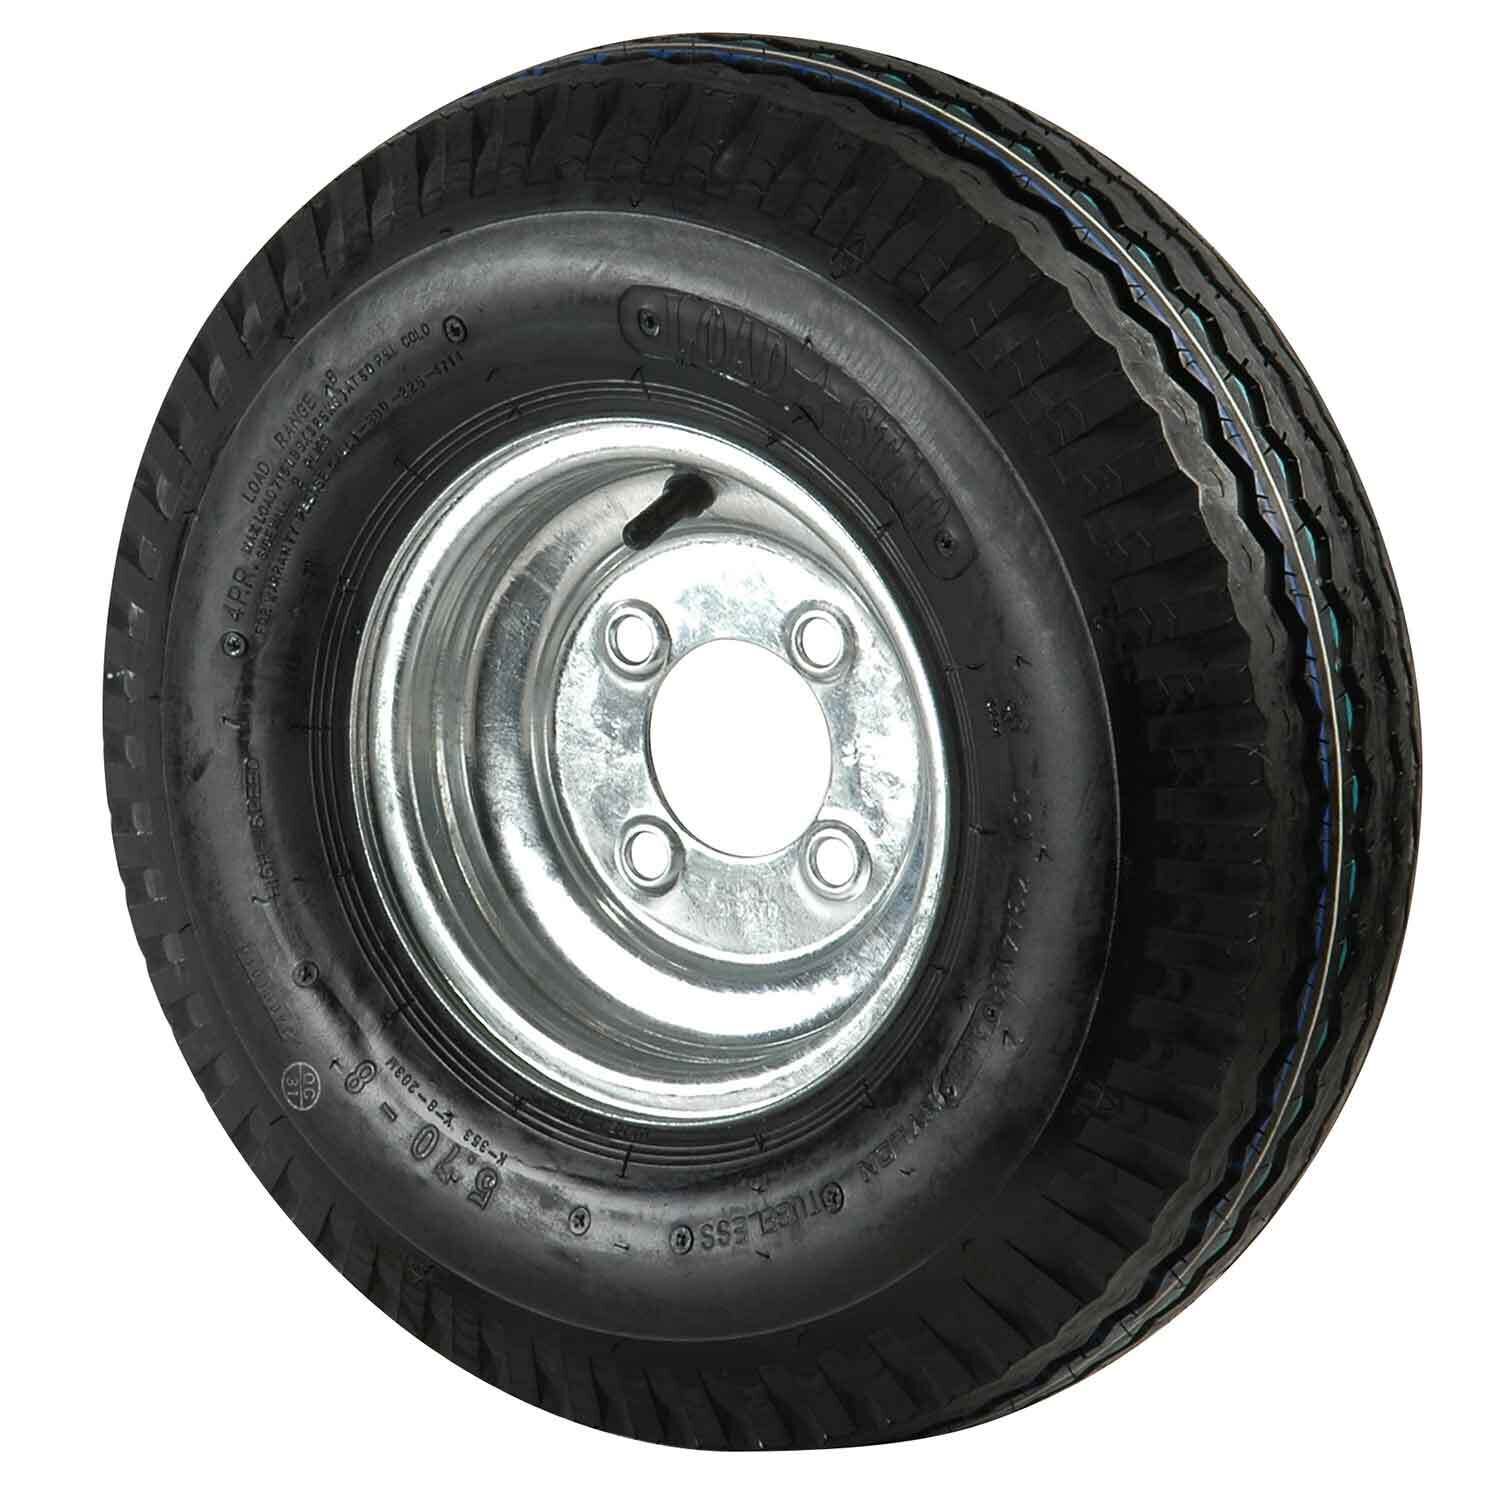 Black Boat Tires And Wheels Sports " Outdoors & Trailer Jack Wheel Stop 